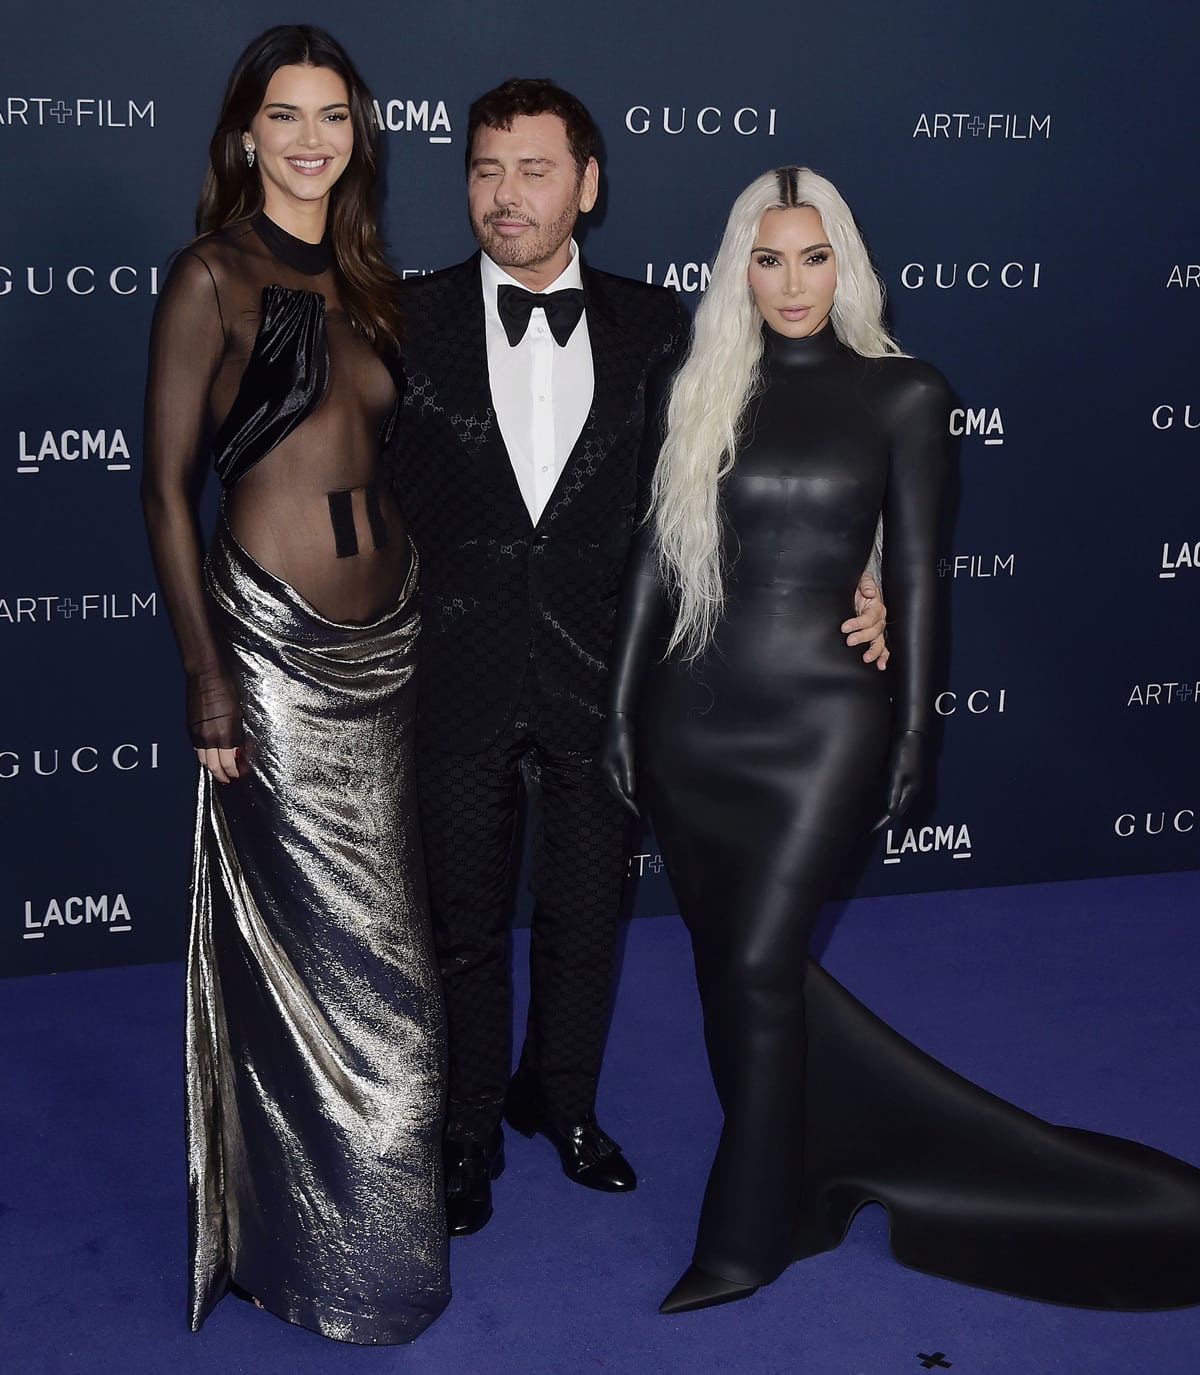 Kendall Jenner, approximately 5 feet 9.25 inches (175.9 cm) tall, is about 7.75 inches (19.4 cm) taller than Kim Kardashian, who is also shorter than the Turkish-born fashion photographer Mert Alas